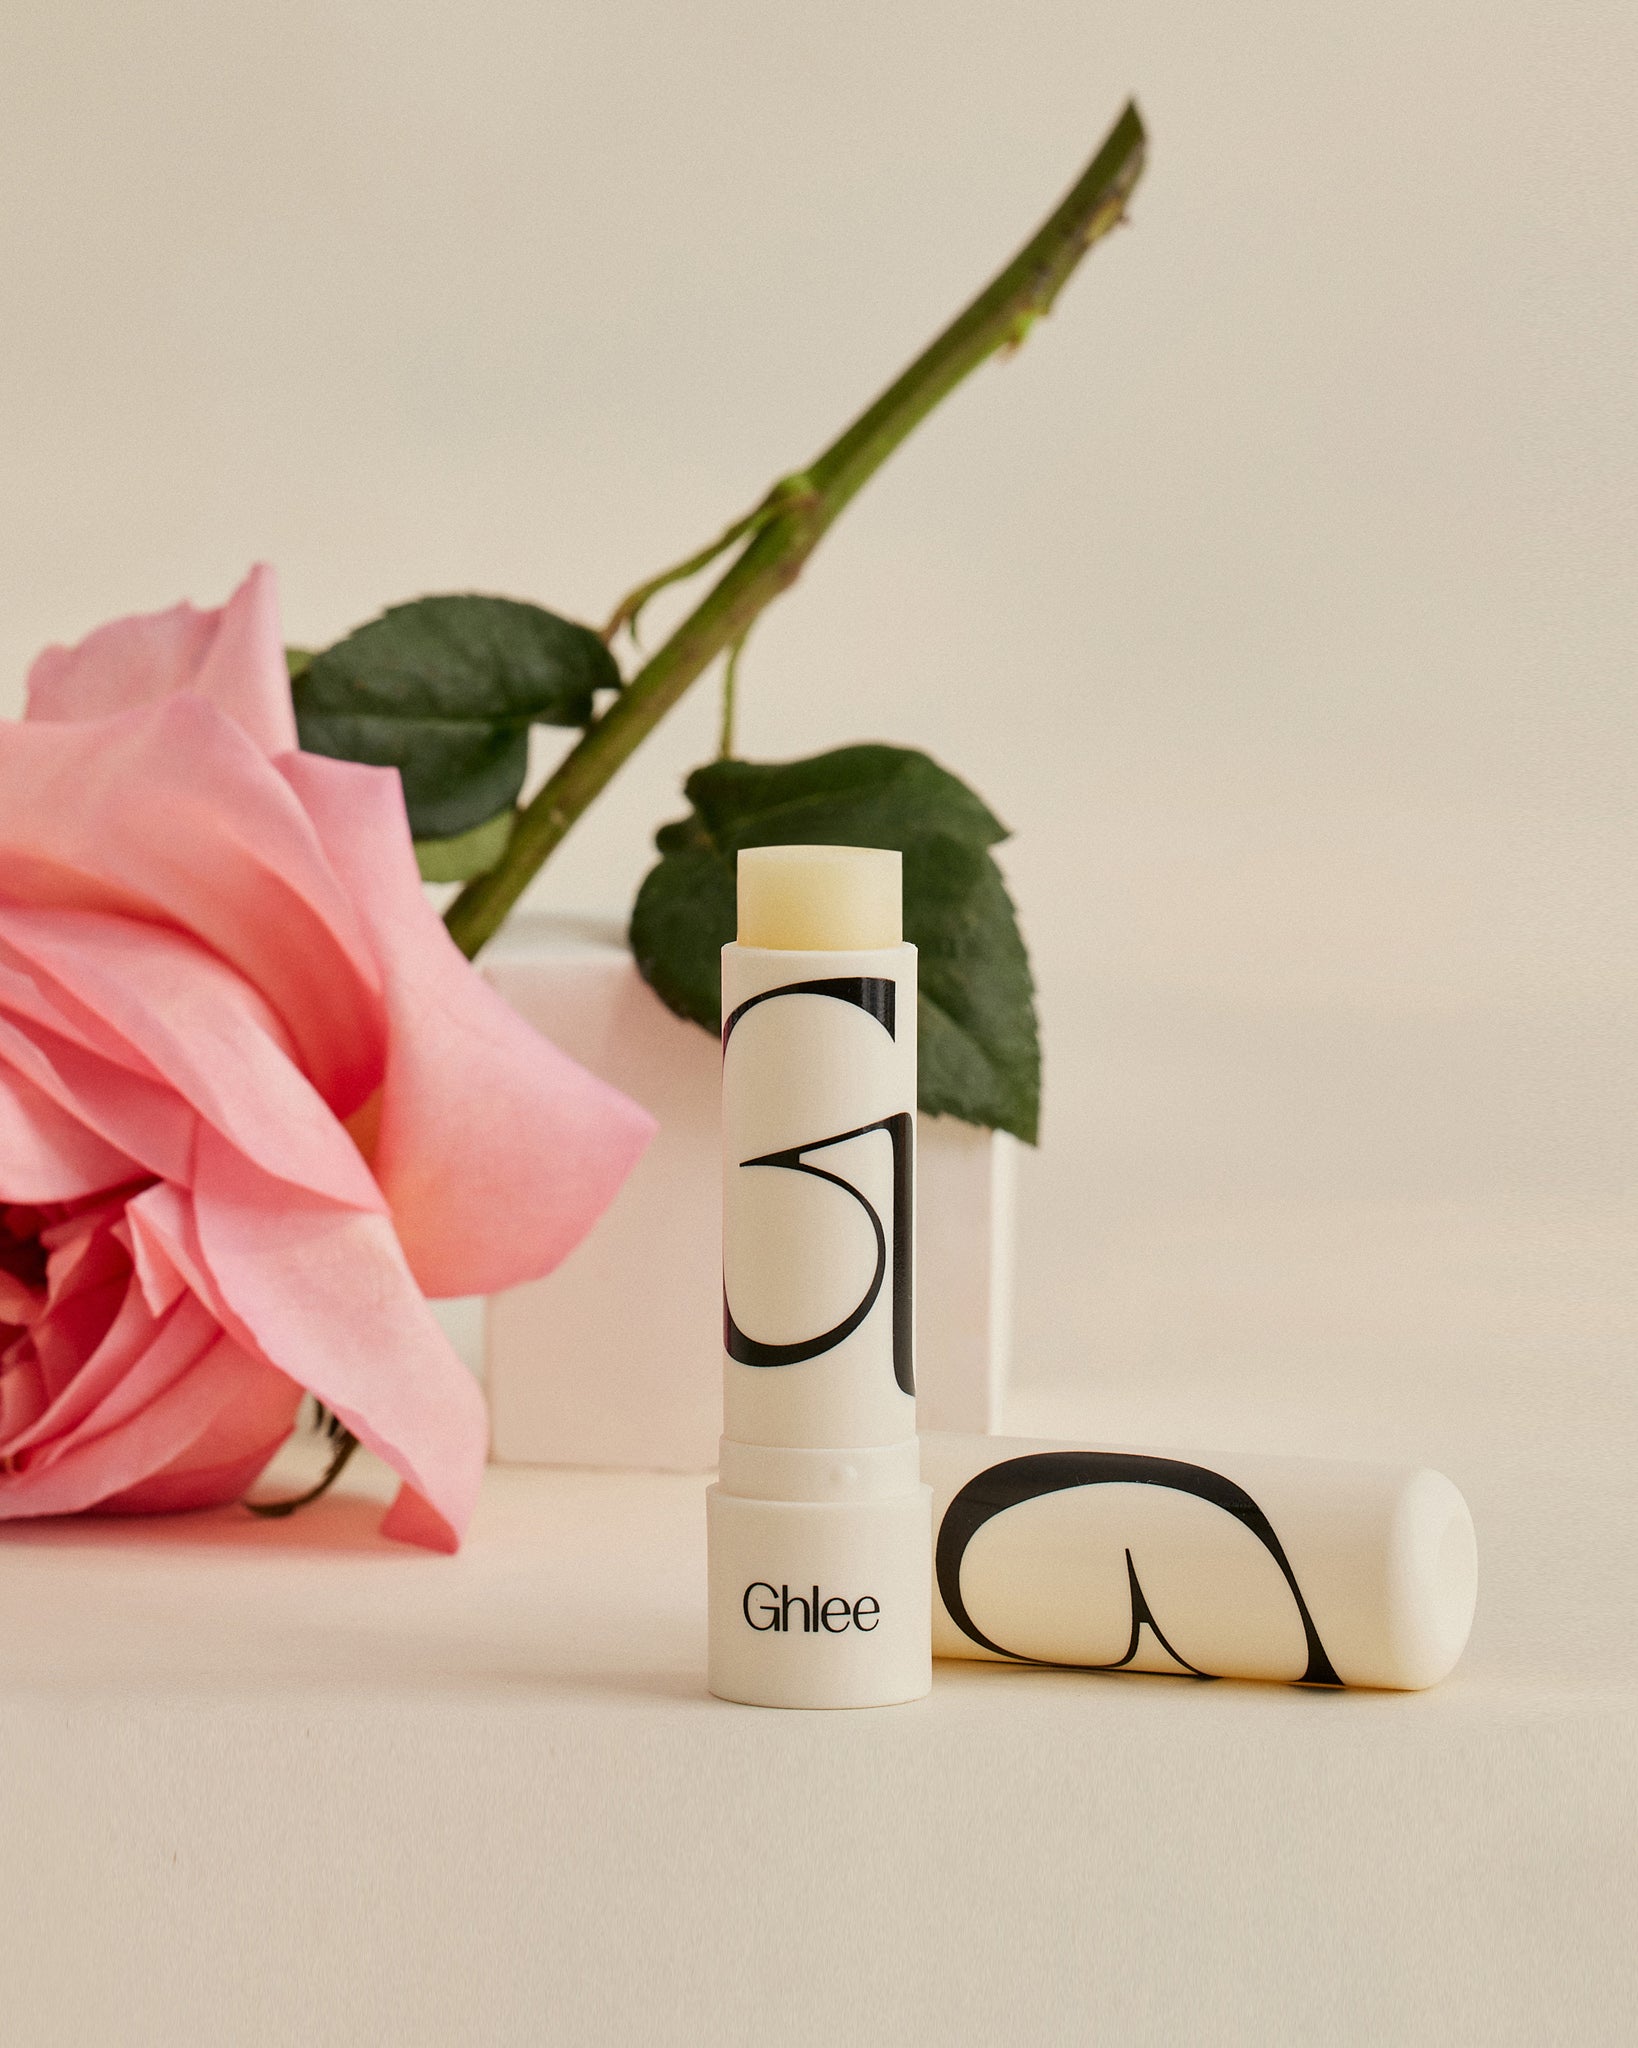 ghlee lip balm rose scent